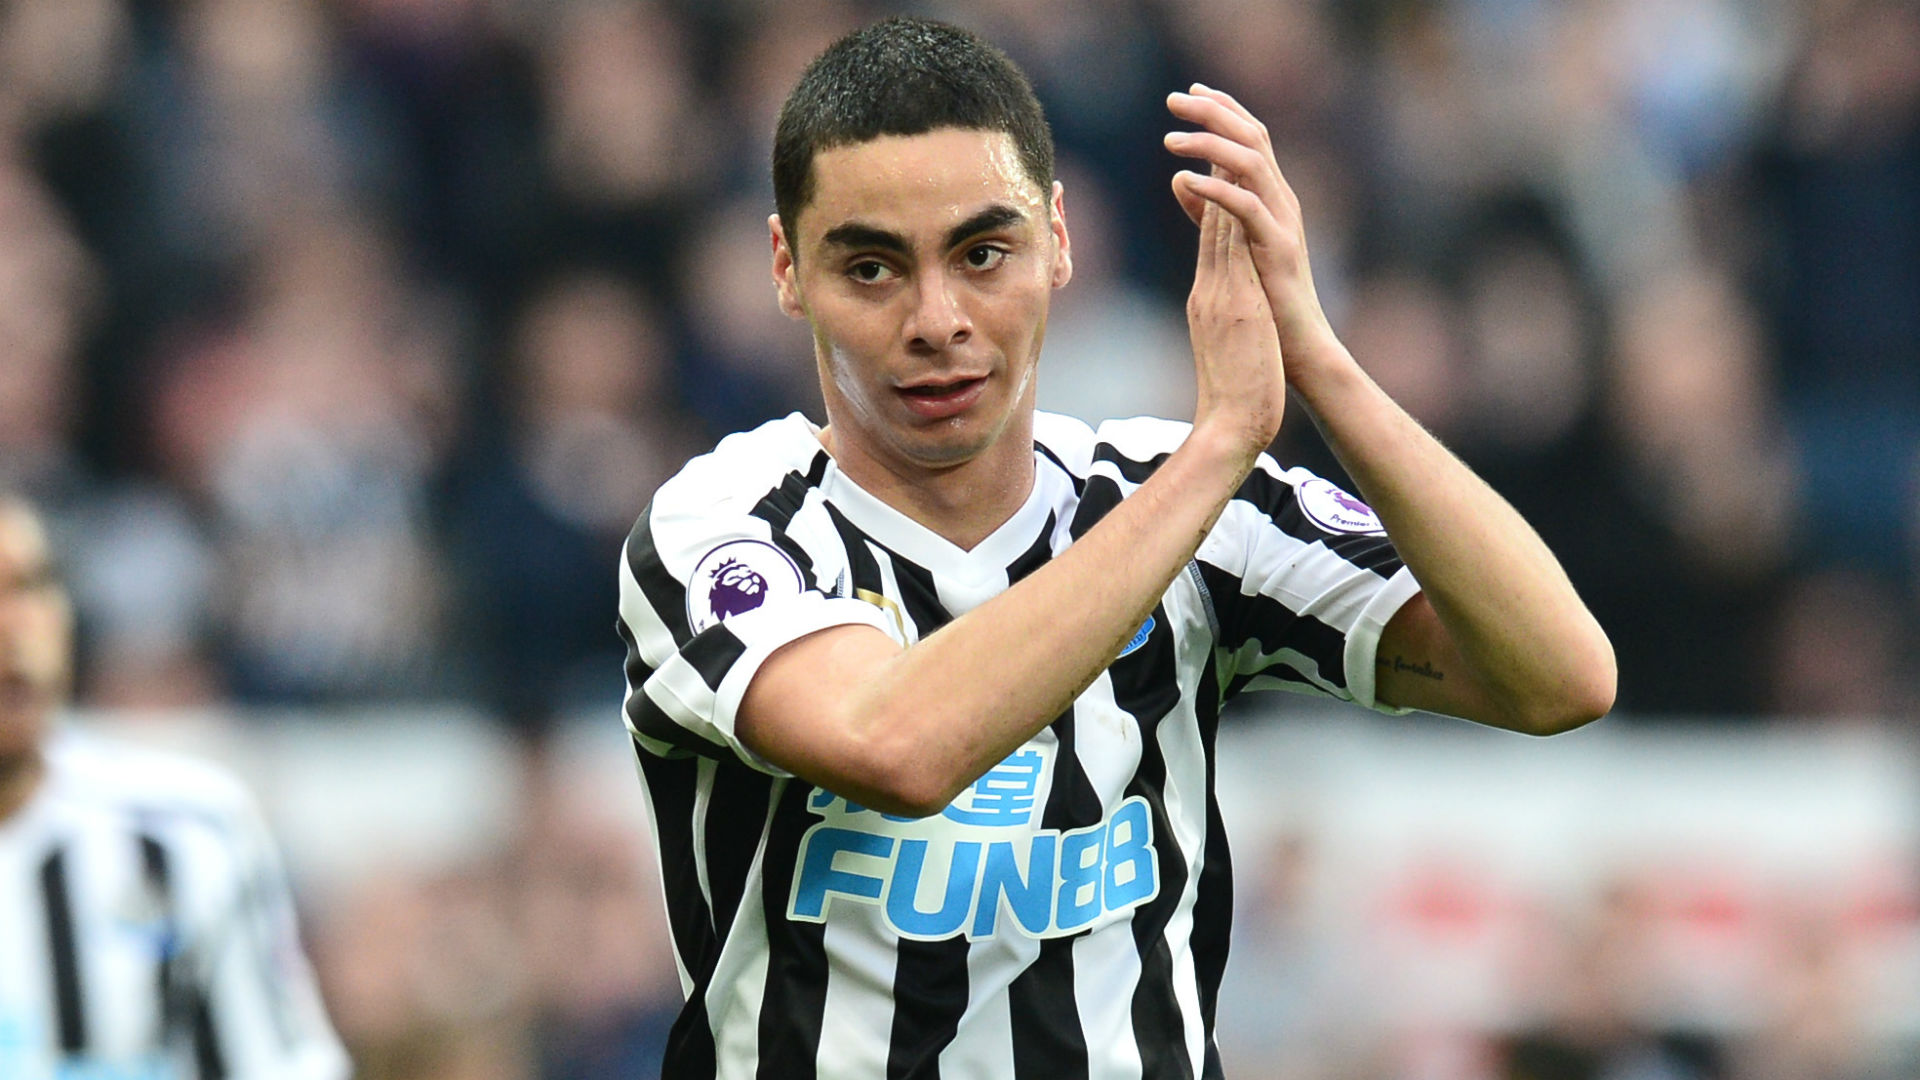 Premier League news: A great day for Newcastle record signing Miguel Almiron - Benitez ...1920 x 1080